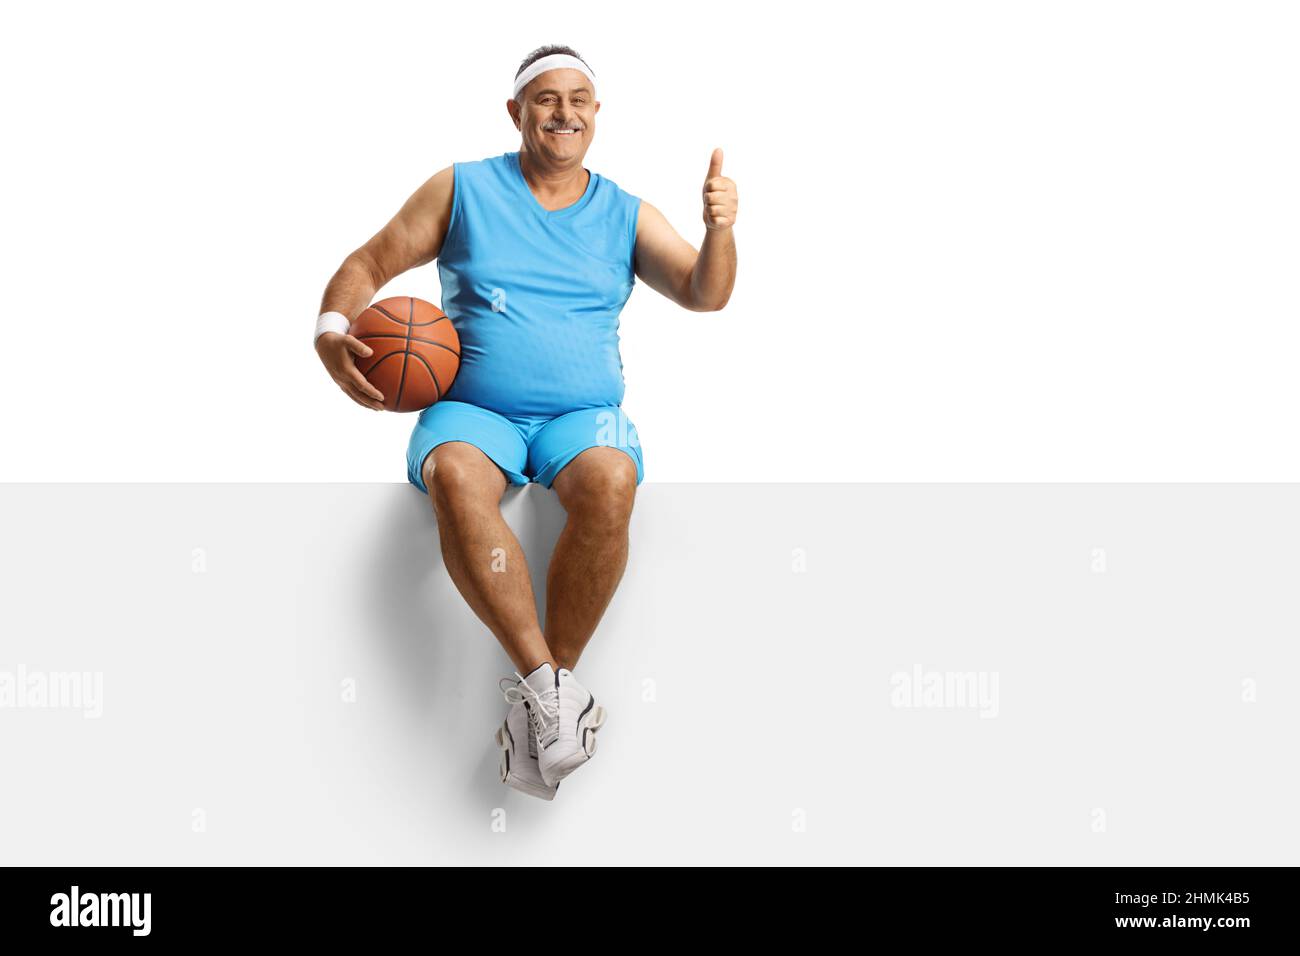 Mature man in a sport jersey with a basketball sitting on a blank panel and gesturing thumbs up isolated on white background Stock Photo